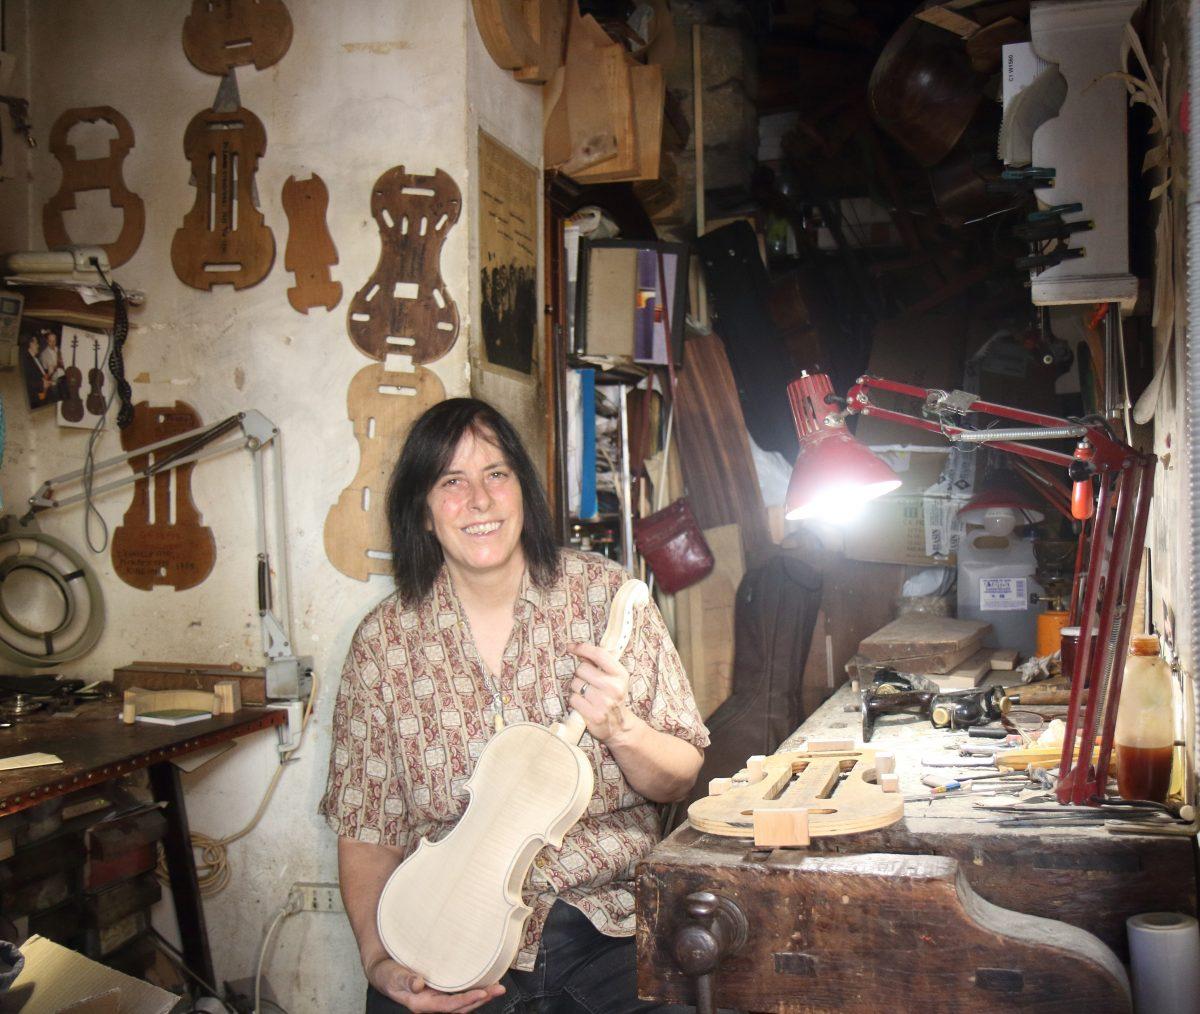 <span style="color: #000000;">Jamie Lazzara, master violin maker and restorer of fine stringed instruments, in her Florence, Italy, workshop on July 11, 2018. (Lorraine Ferrier/The Epoch Times)</span>